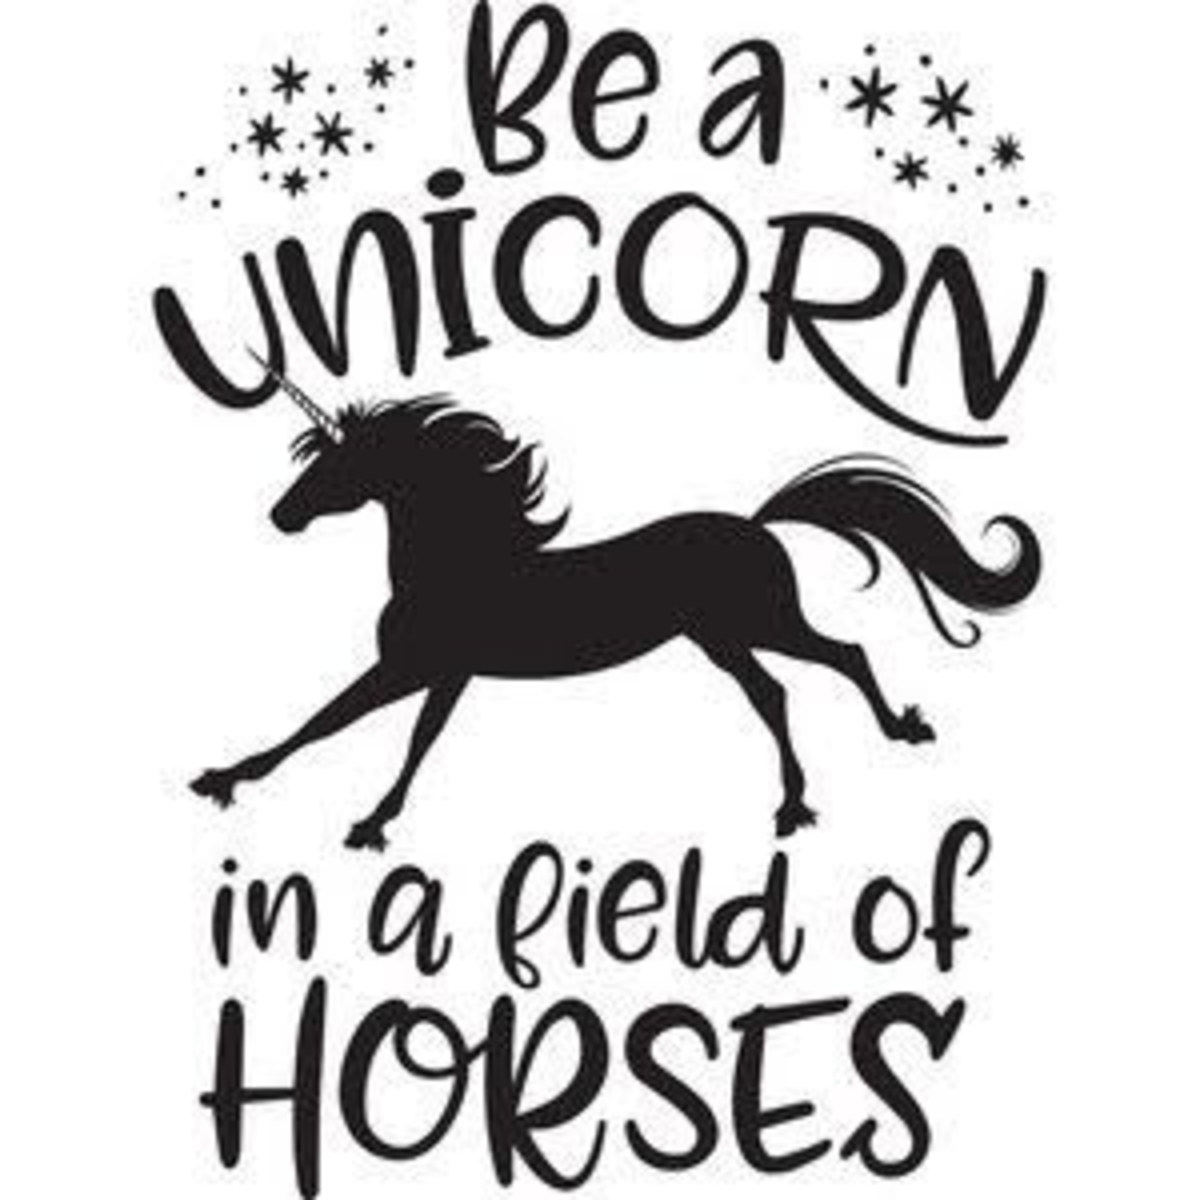 Remember if you look long, hard and carefully enough, you will find your unicorn among the horses!